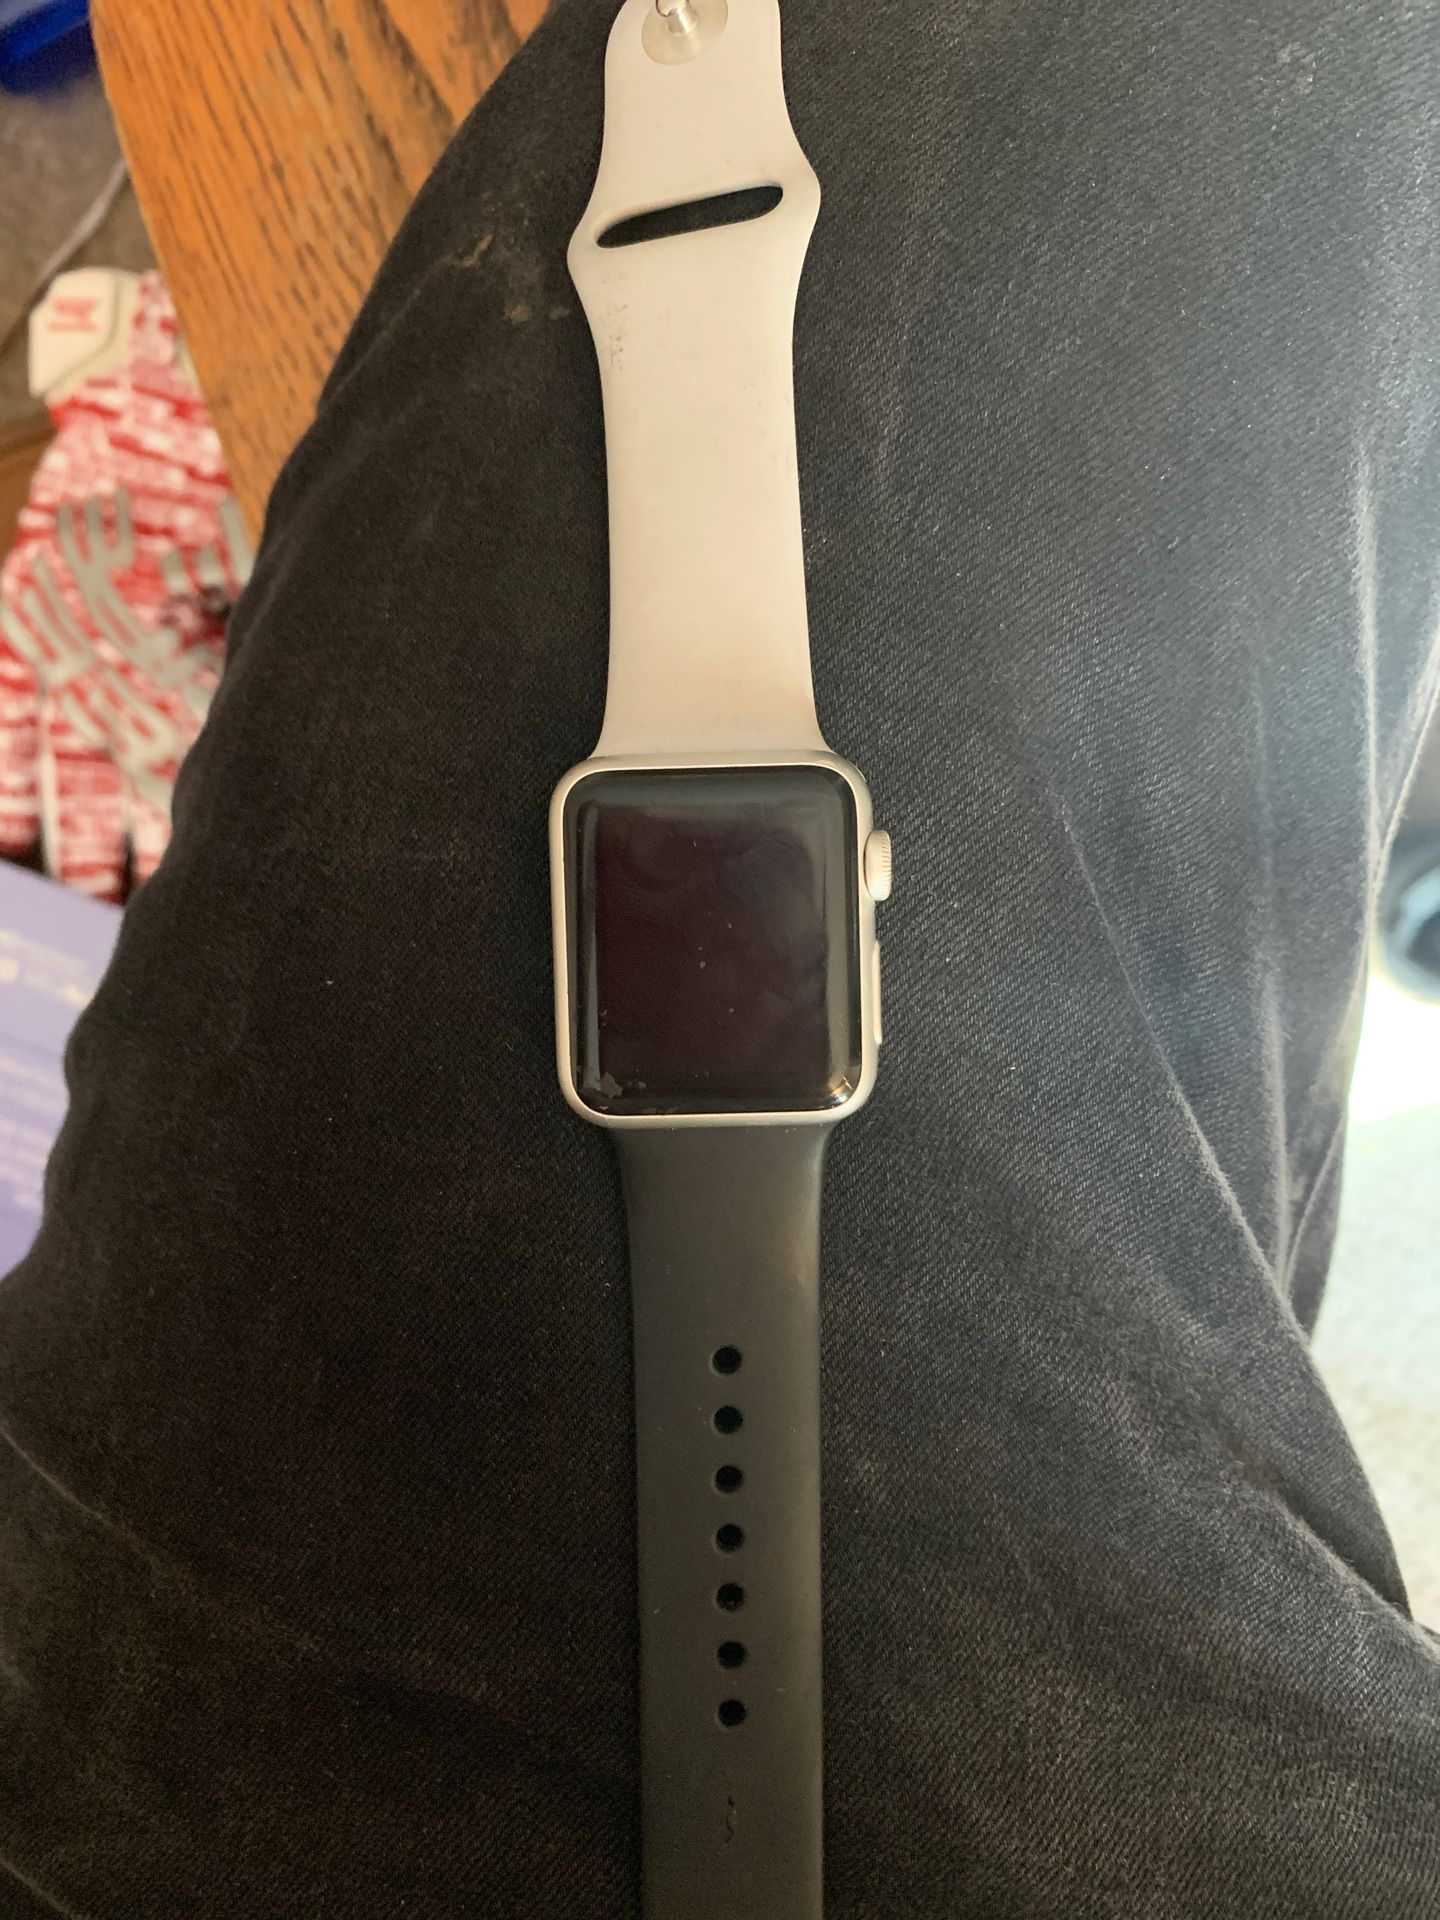 Apple Watch work perfectly HMU for more details series 1